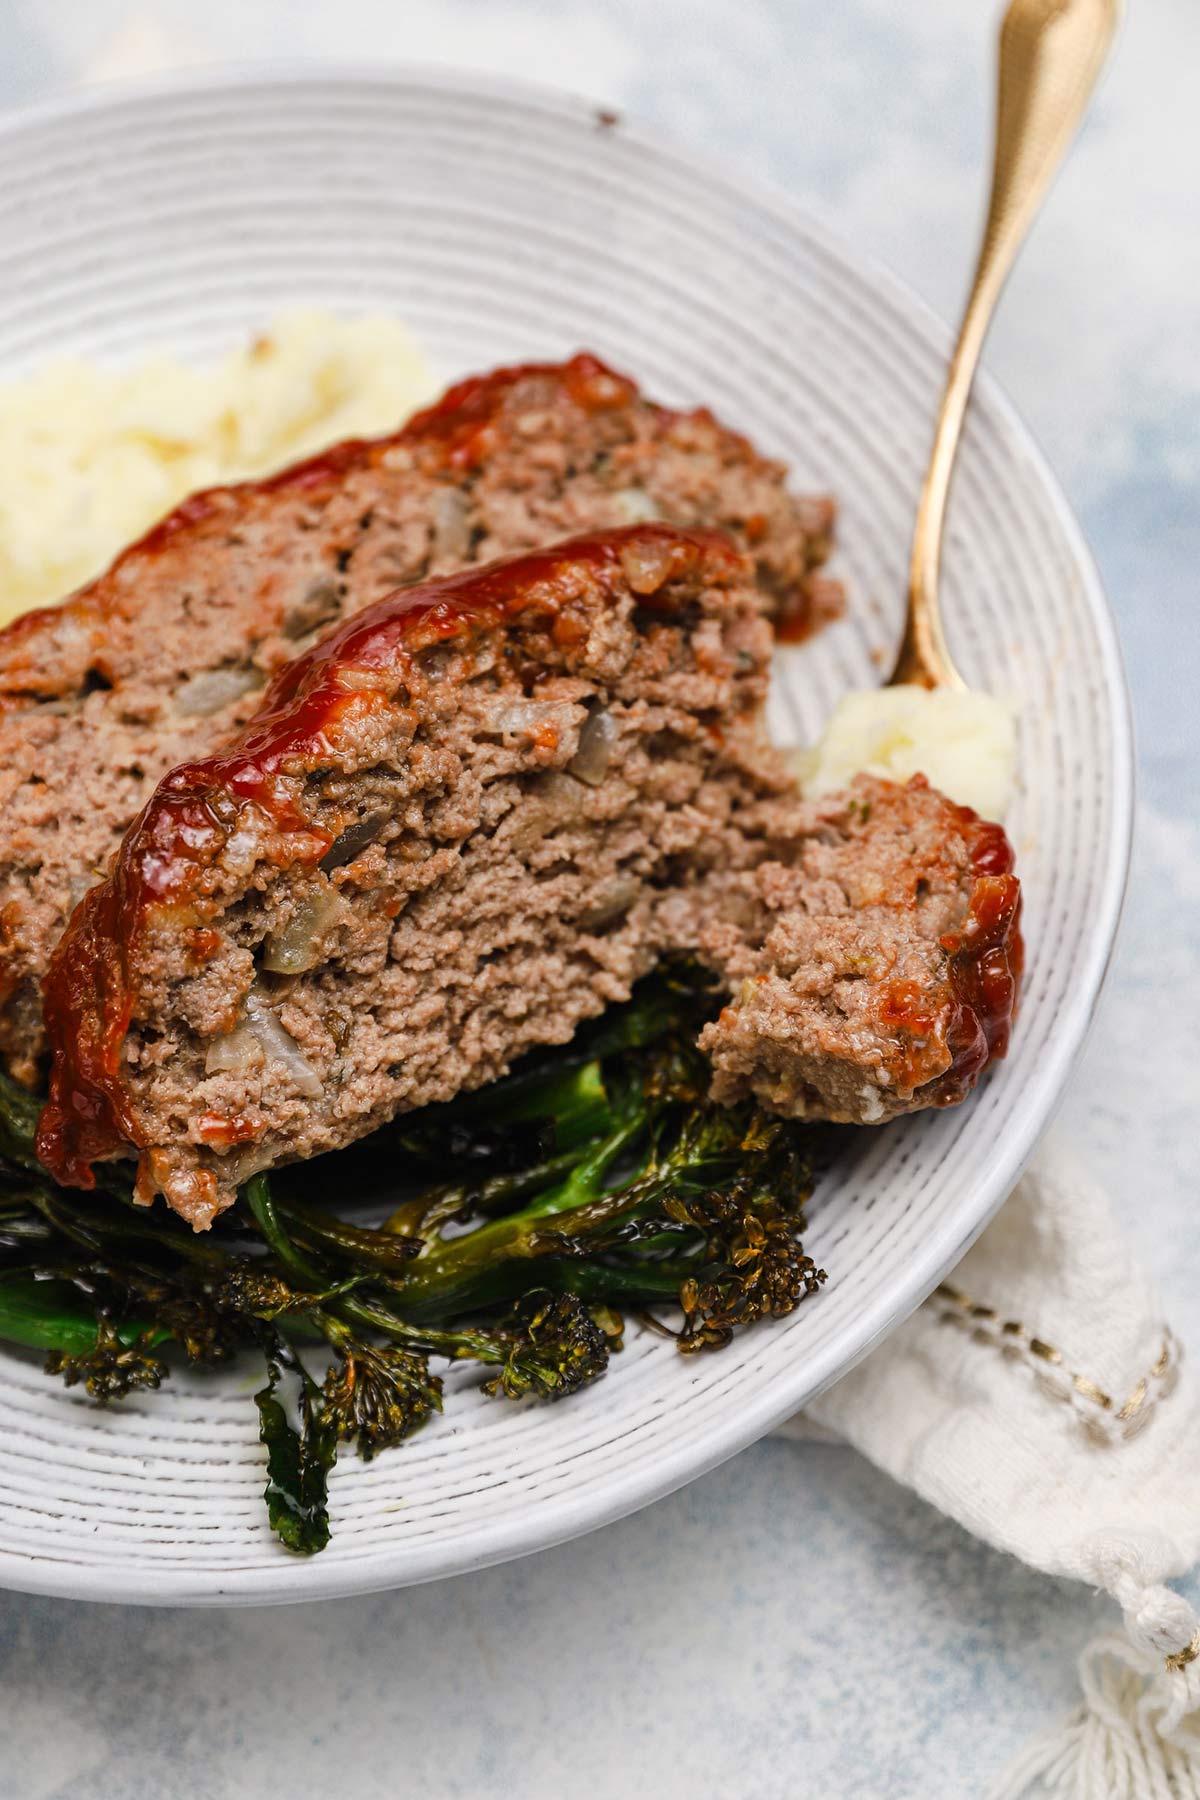 2 slices of meatloaf on a white plate with a fork and roasted broccoli and mashed potatoes.